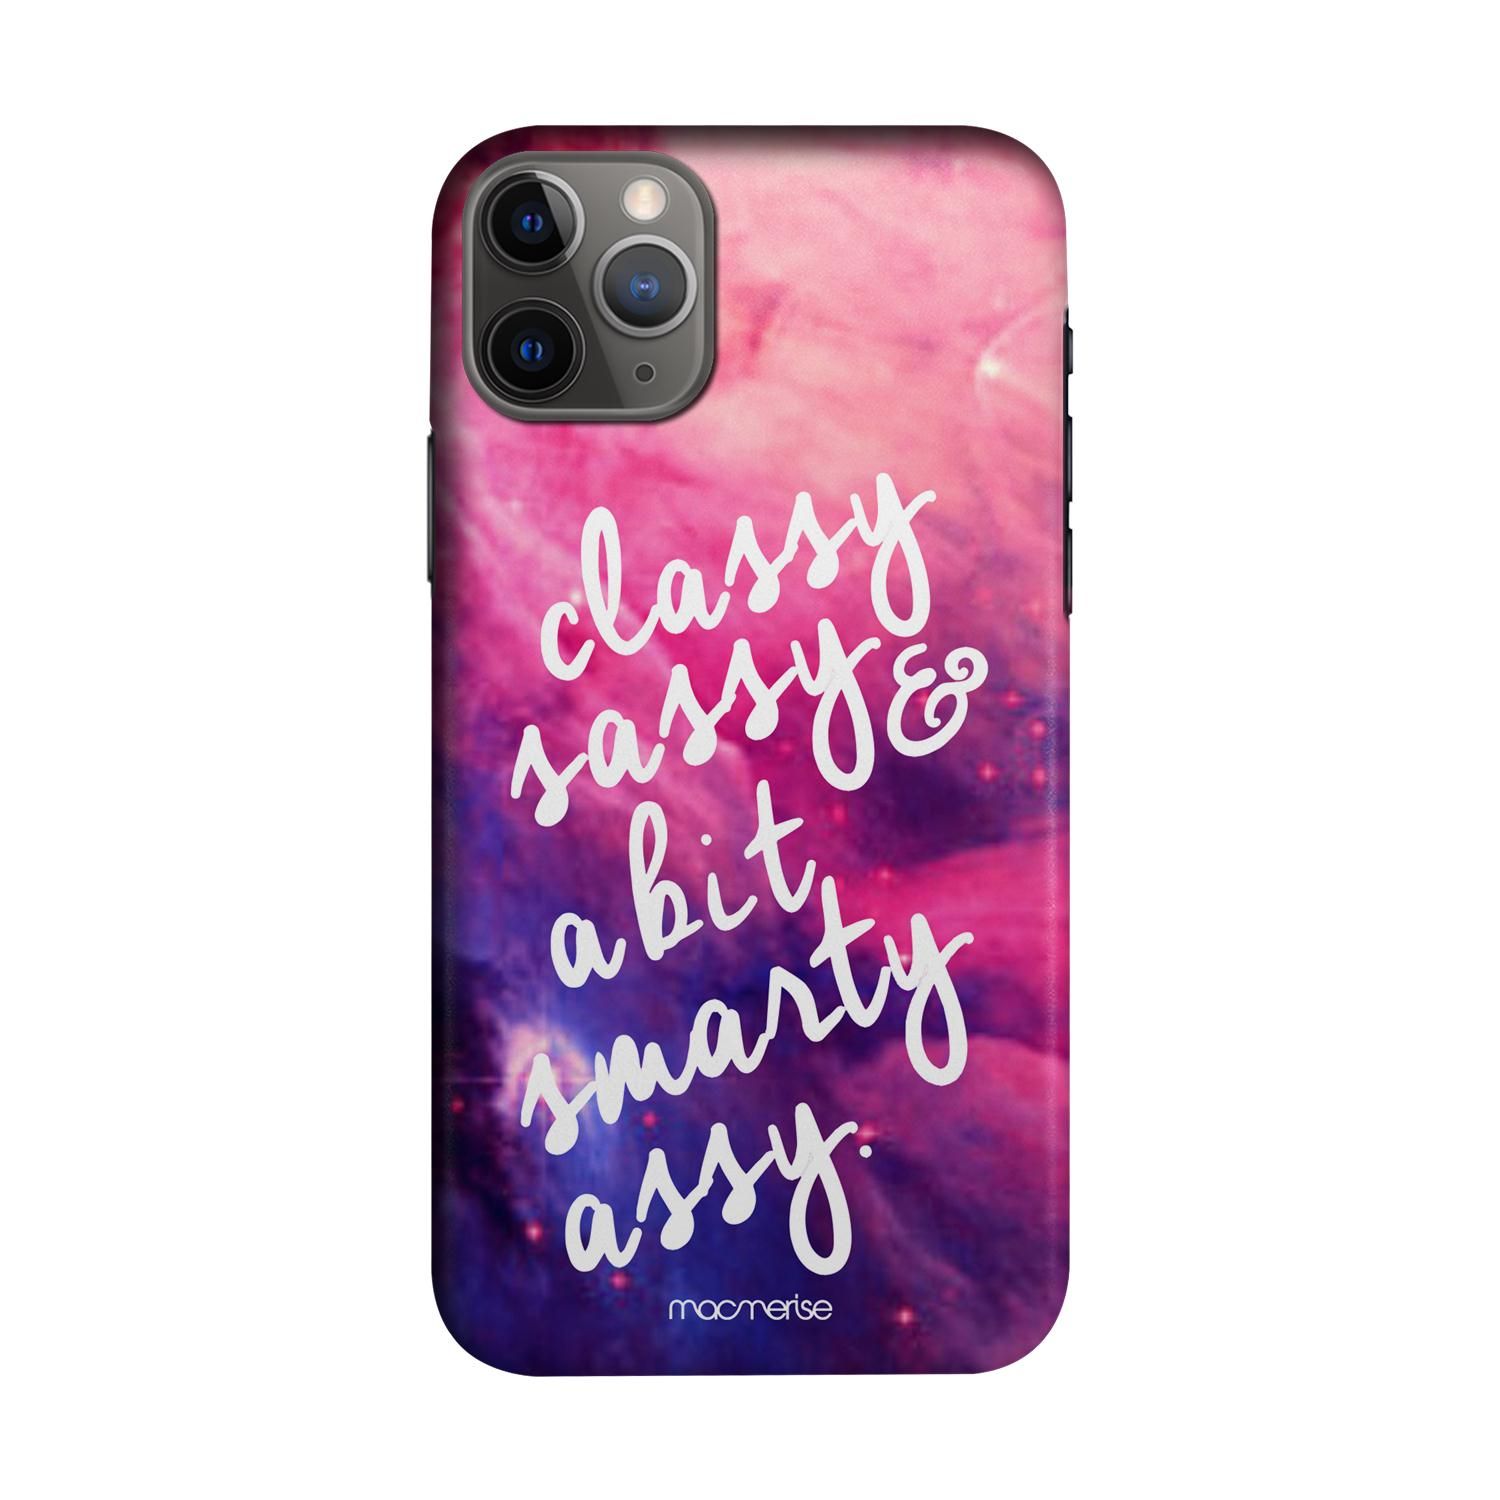 Buy Smarty Assy - Sleek Phone Case for iPhone 11 Pro Max Online